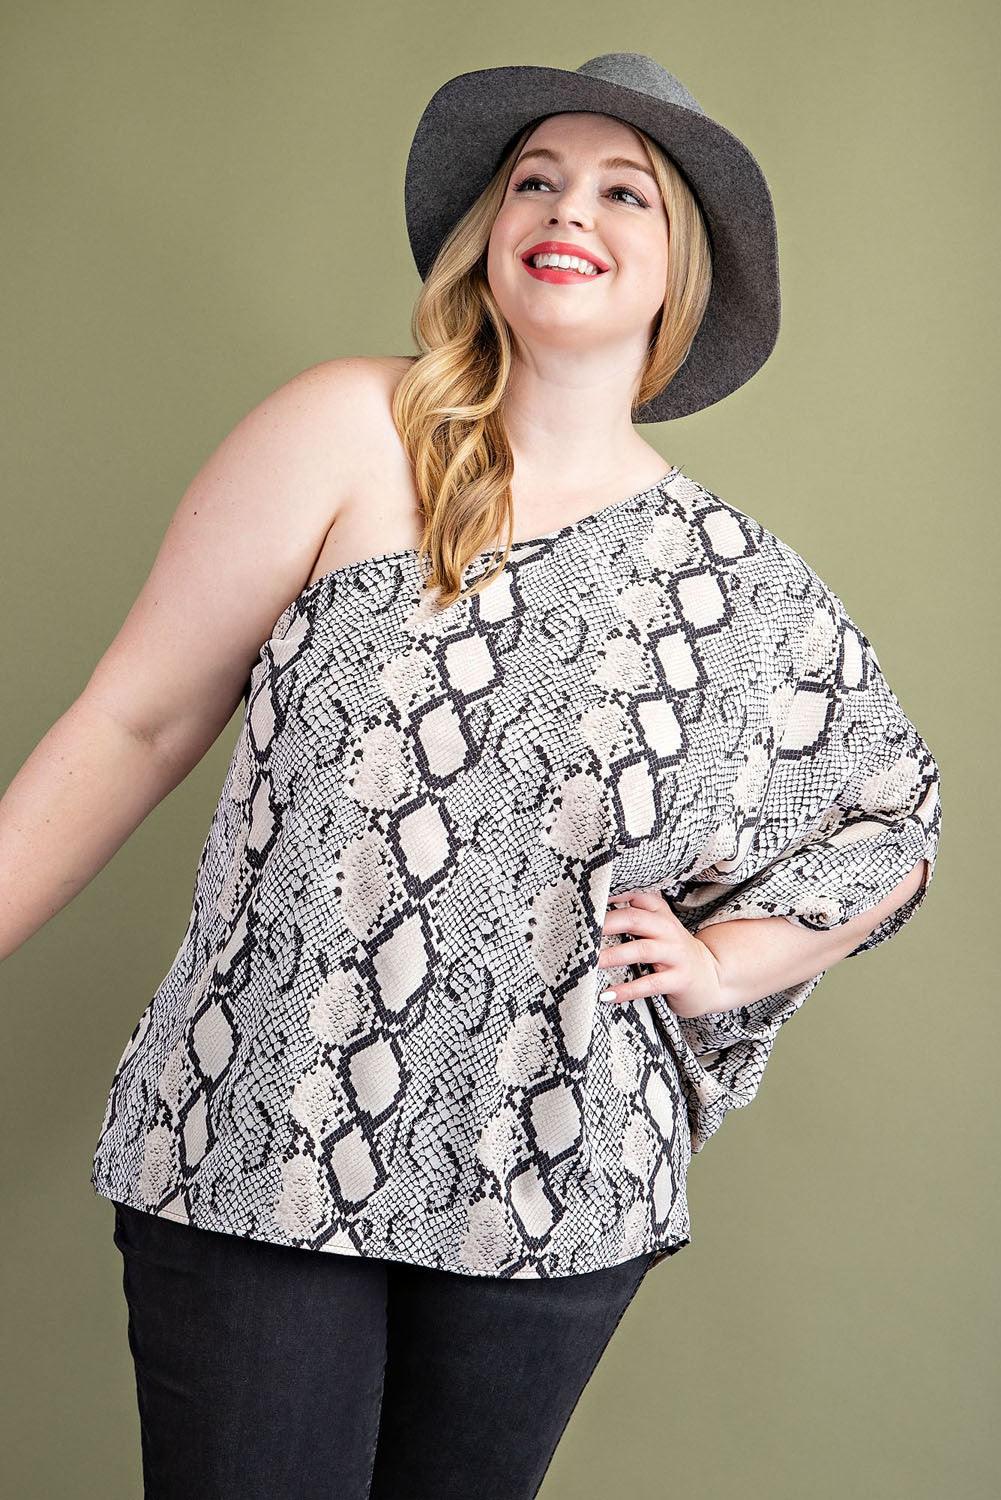 PLUS one shoulder snake print top - RK Collections Boutique